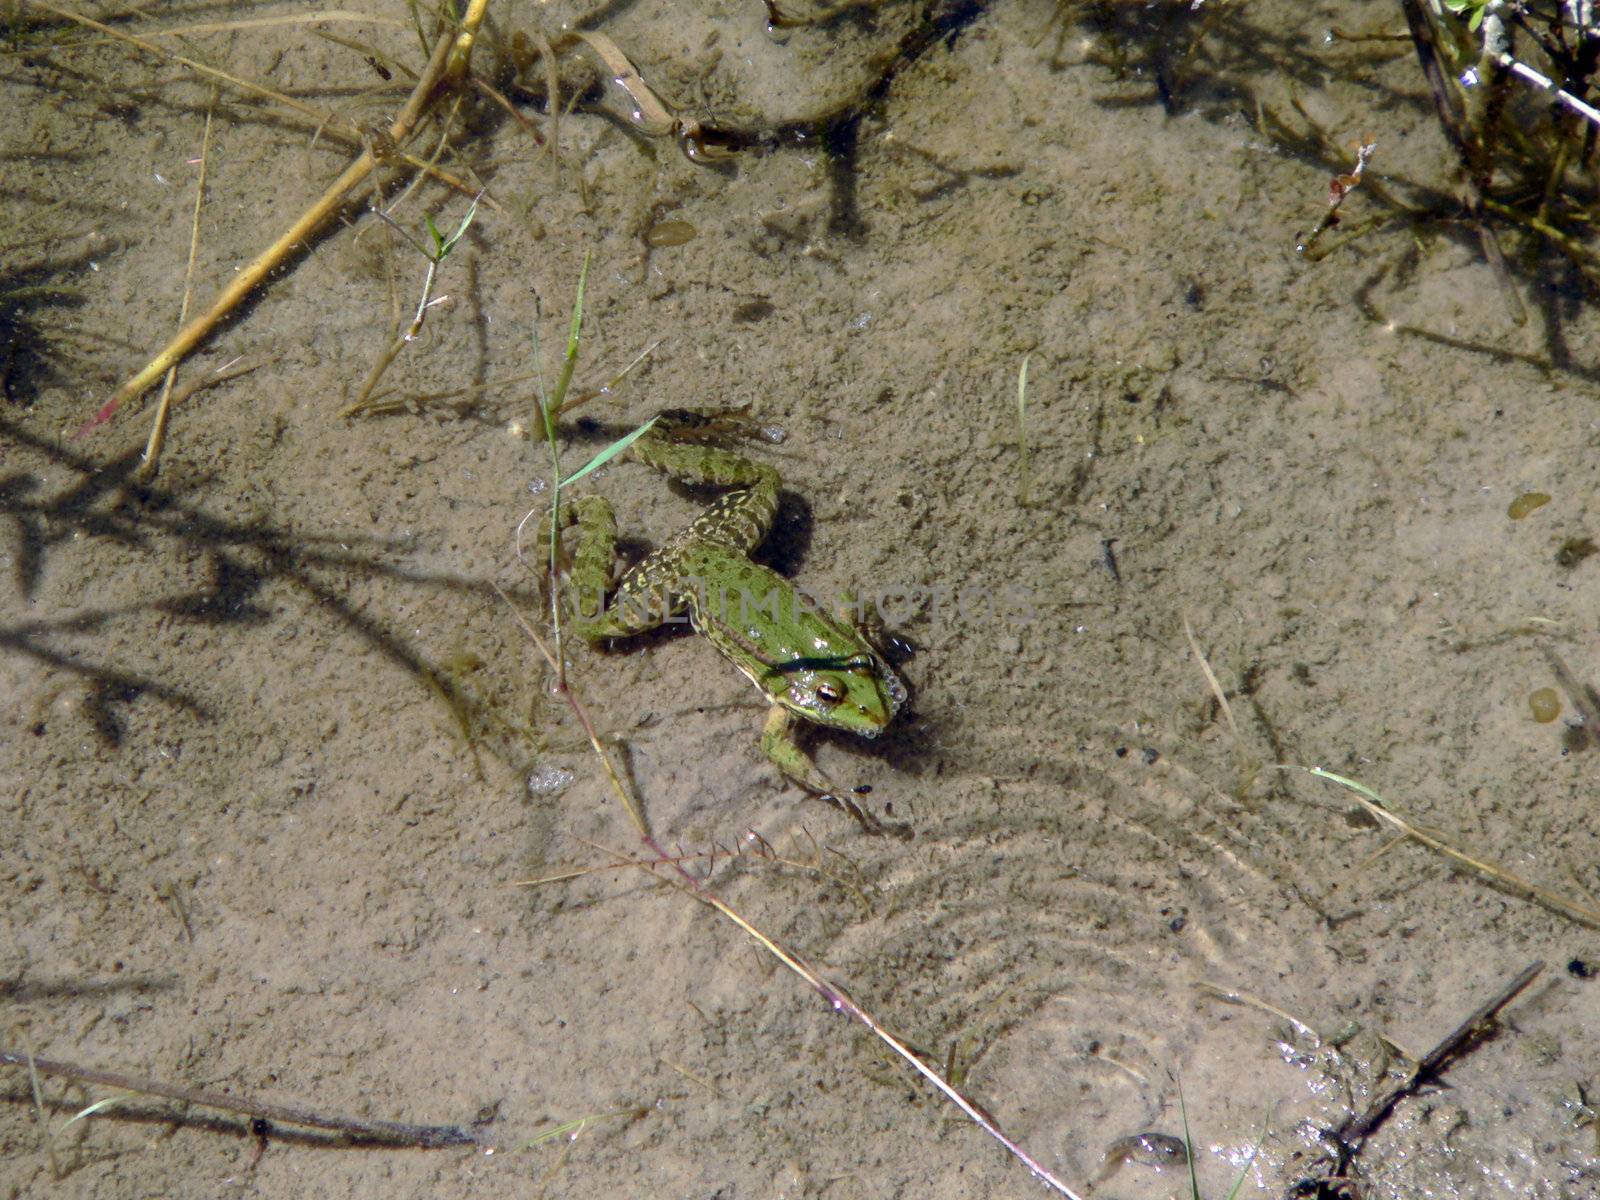 Frog with polliwog under water